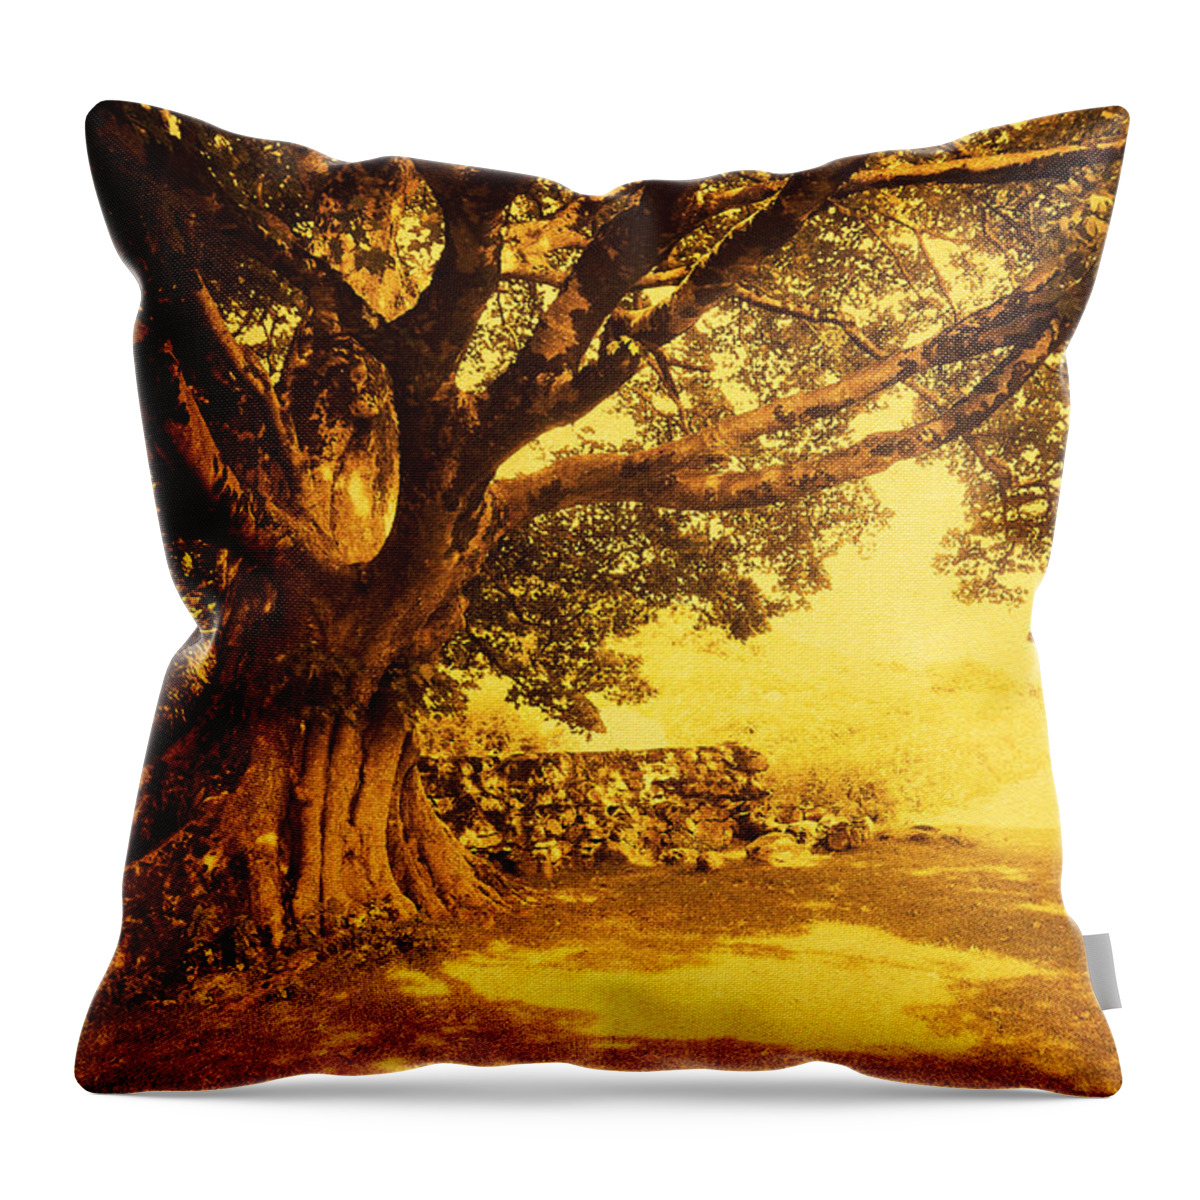 Ireland Throw Pillow featuring the photograph Spiritual Place. Wicklow Mountains. Ireland by Jenny Rainbow